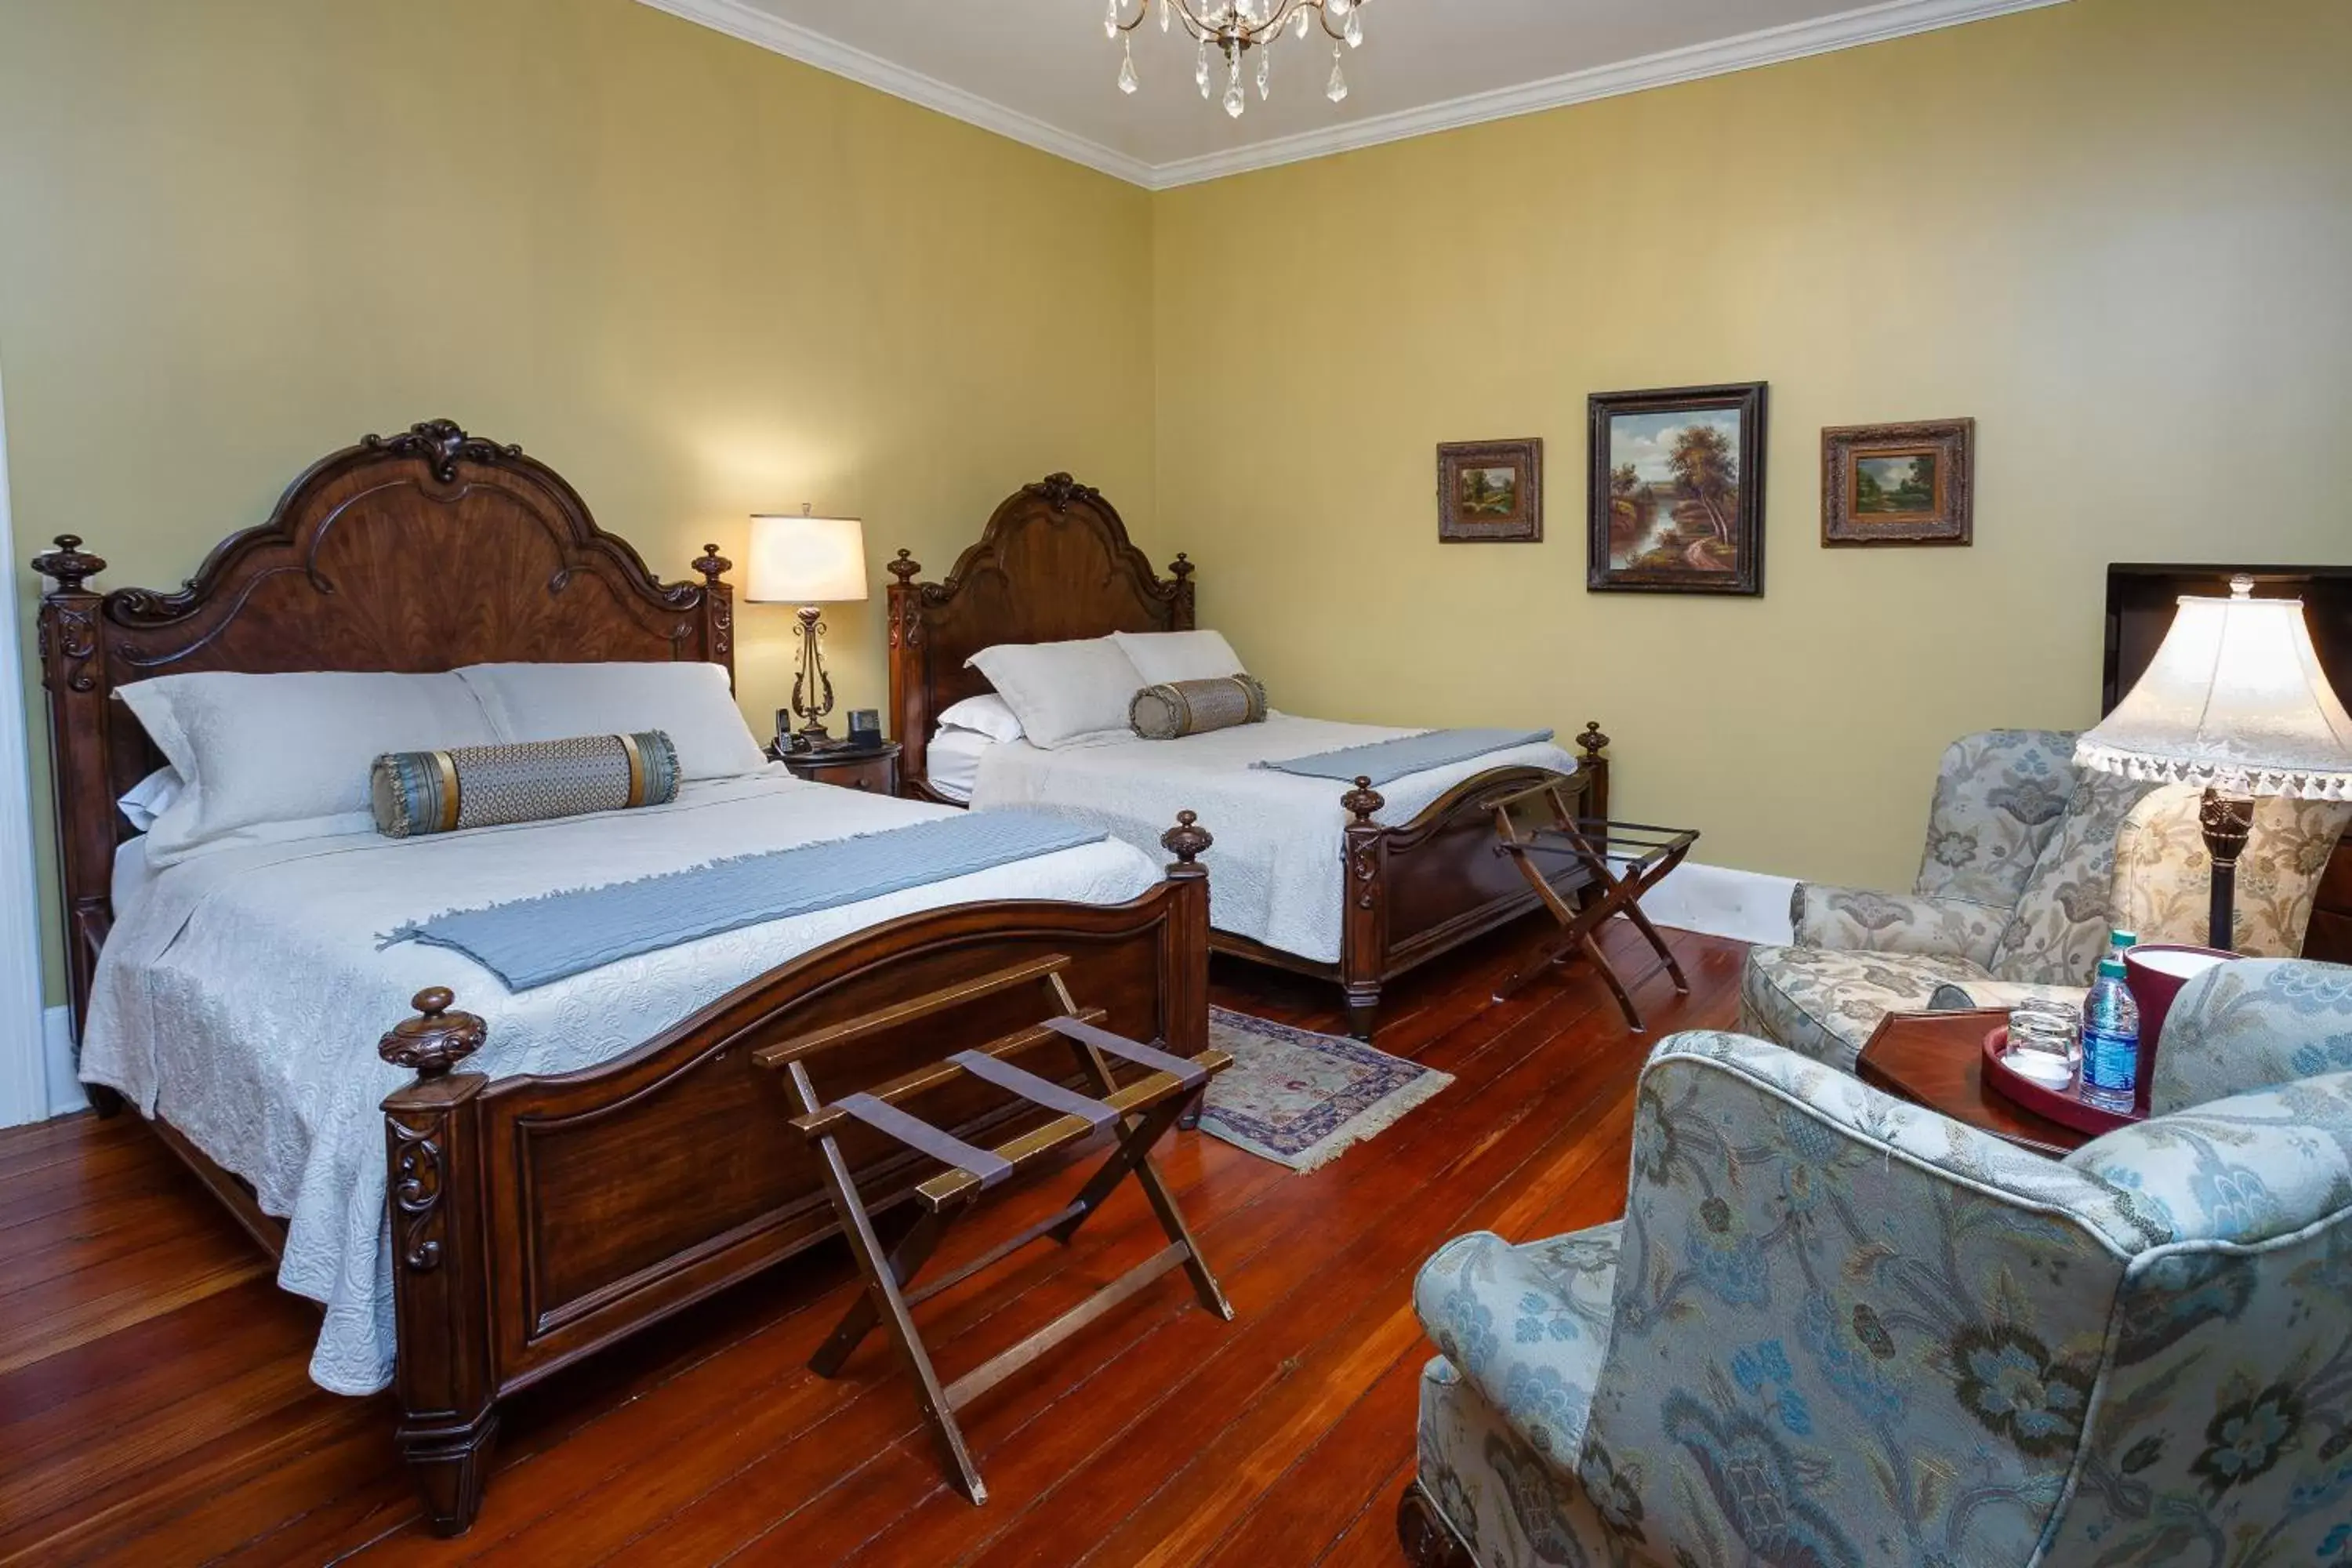 Bed, Room Photo in Eliza Thompson House, Historic Inns of Savannah Collection